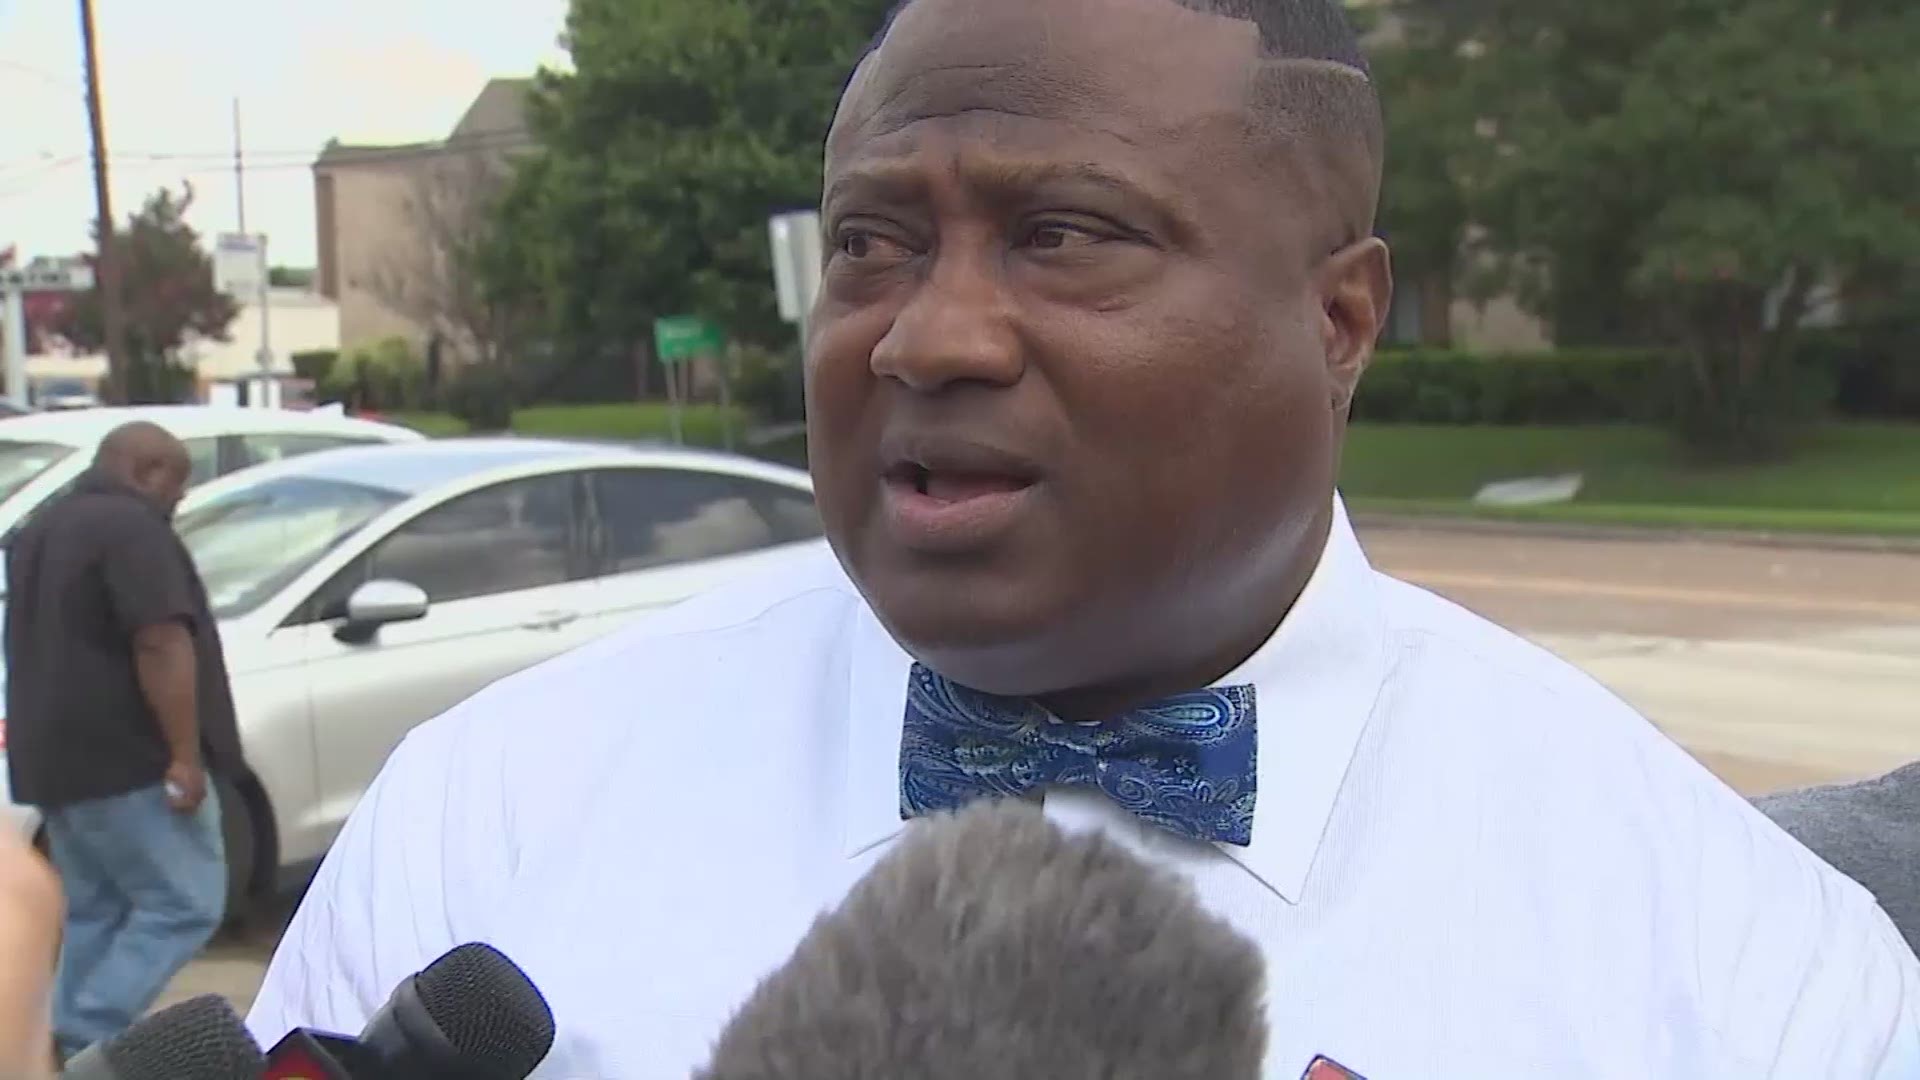 Houston community activist Quanell X and Texas EquuSearch founder Tim Miller say that Maleah Davis' stepfather confessed that her death was an accident and that he dumped her body in Arkansas.